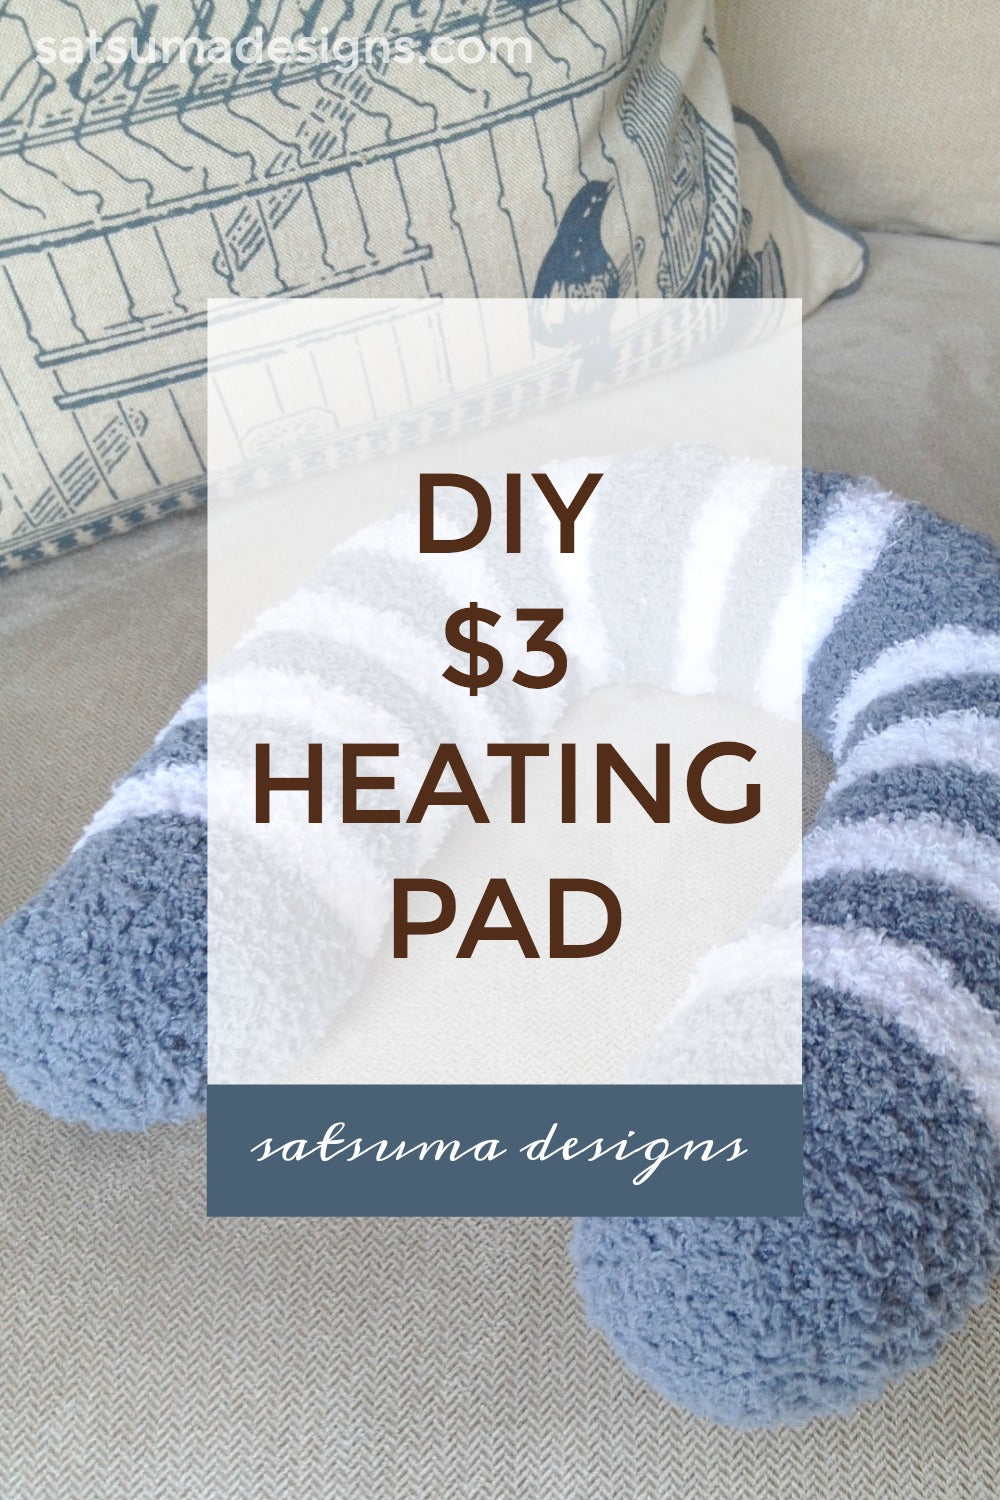 sew a cozy heat pad for $3 in 10 minutes natural maker mom at satsuma designs DIY $3 heating pad | Easy to make heating pad with $3 dollar store supplies #spa #relax #zen #spaday #athomespa #retreat #calm #meditate 